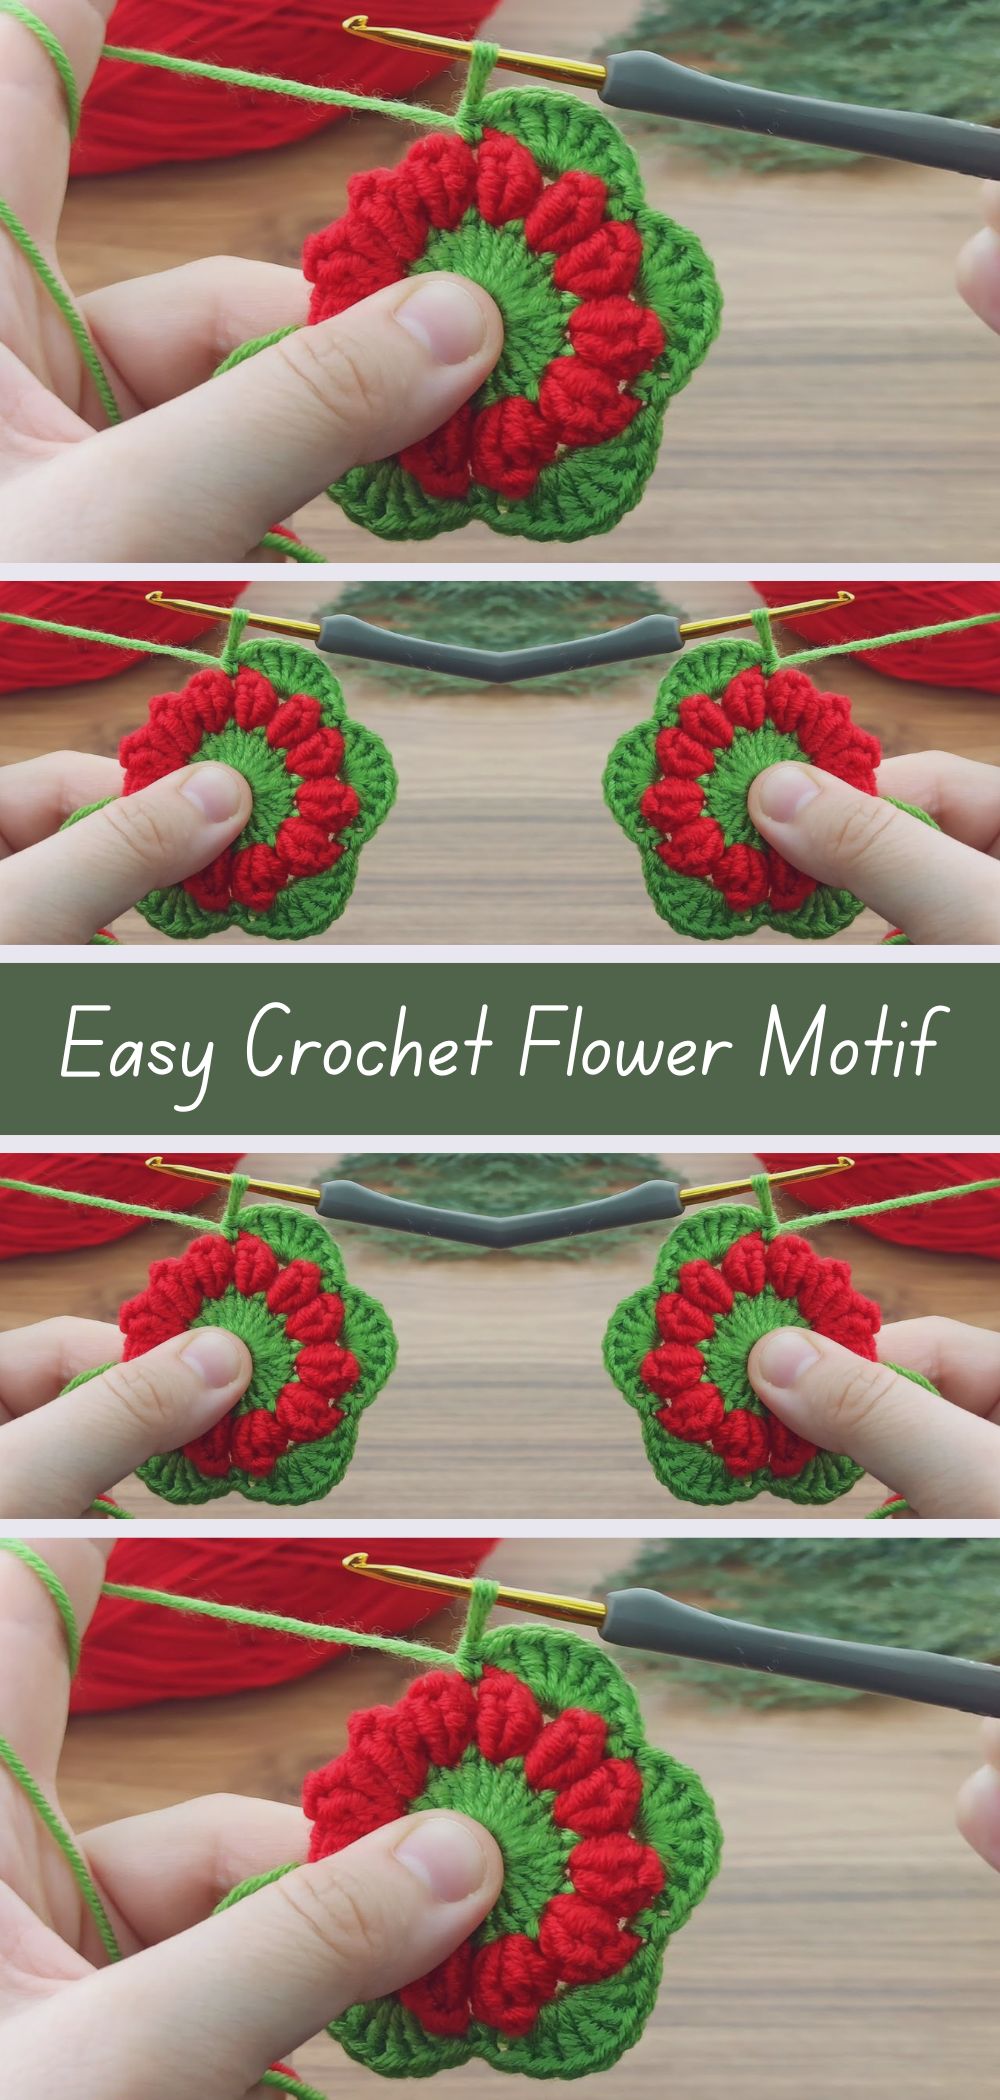 Two-Color Easy Crochet Flower Motif Pattern - Craft beautiful two-color crochet flower motifs with ease using this simple pattern"